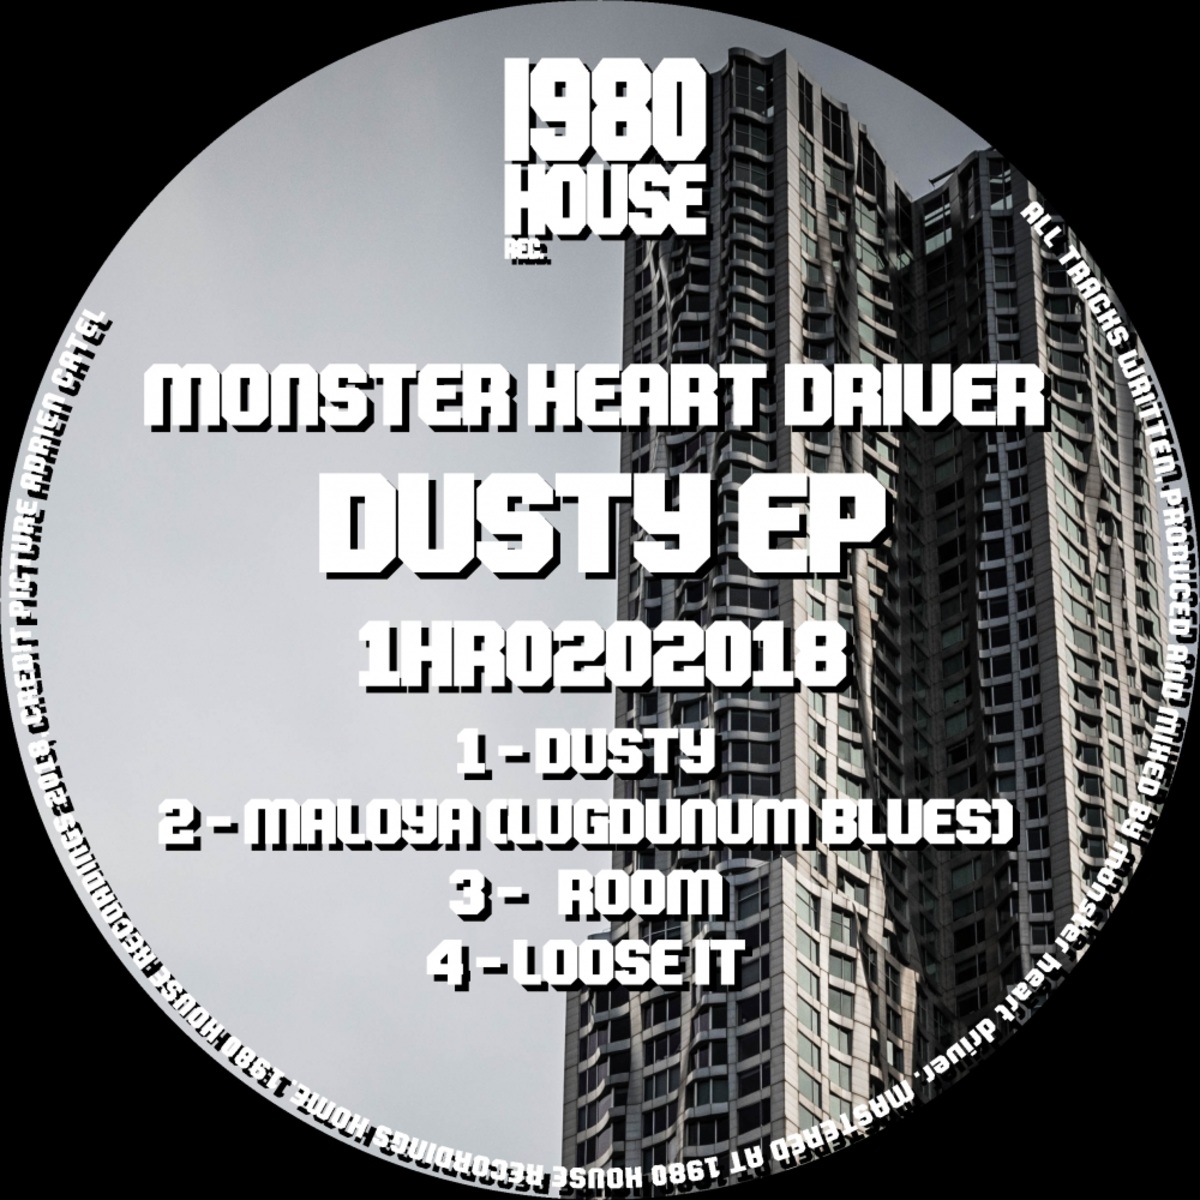 mOnster heart driver - Dusty Ep / 1980 House Recordings